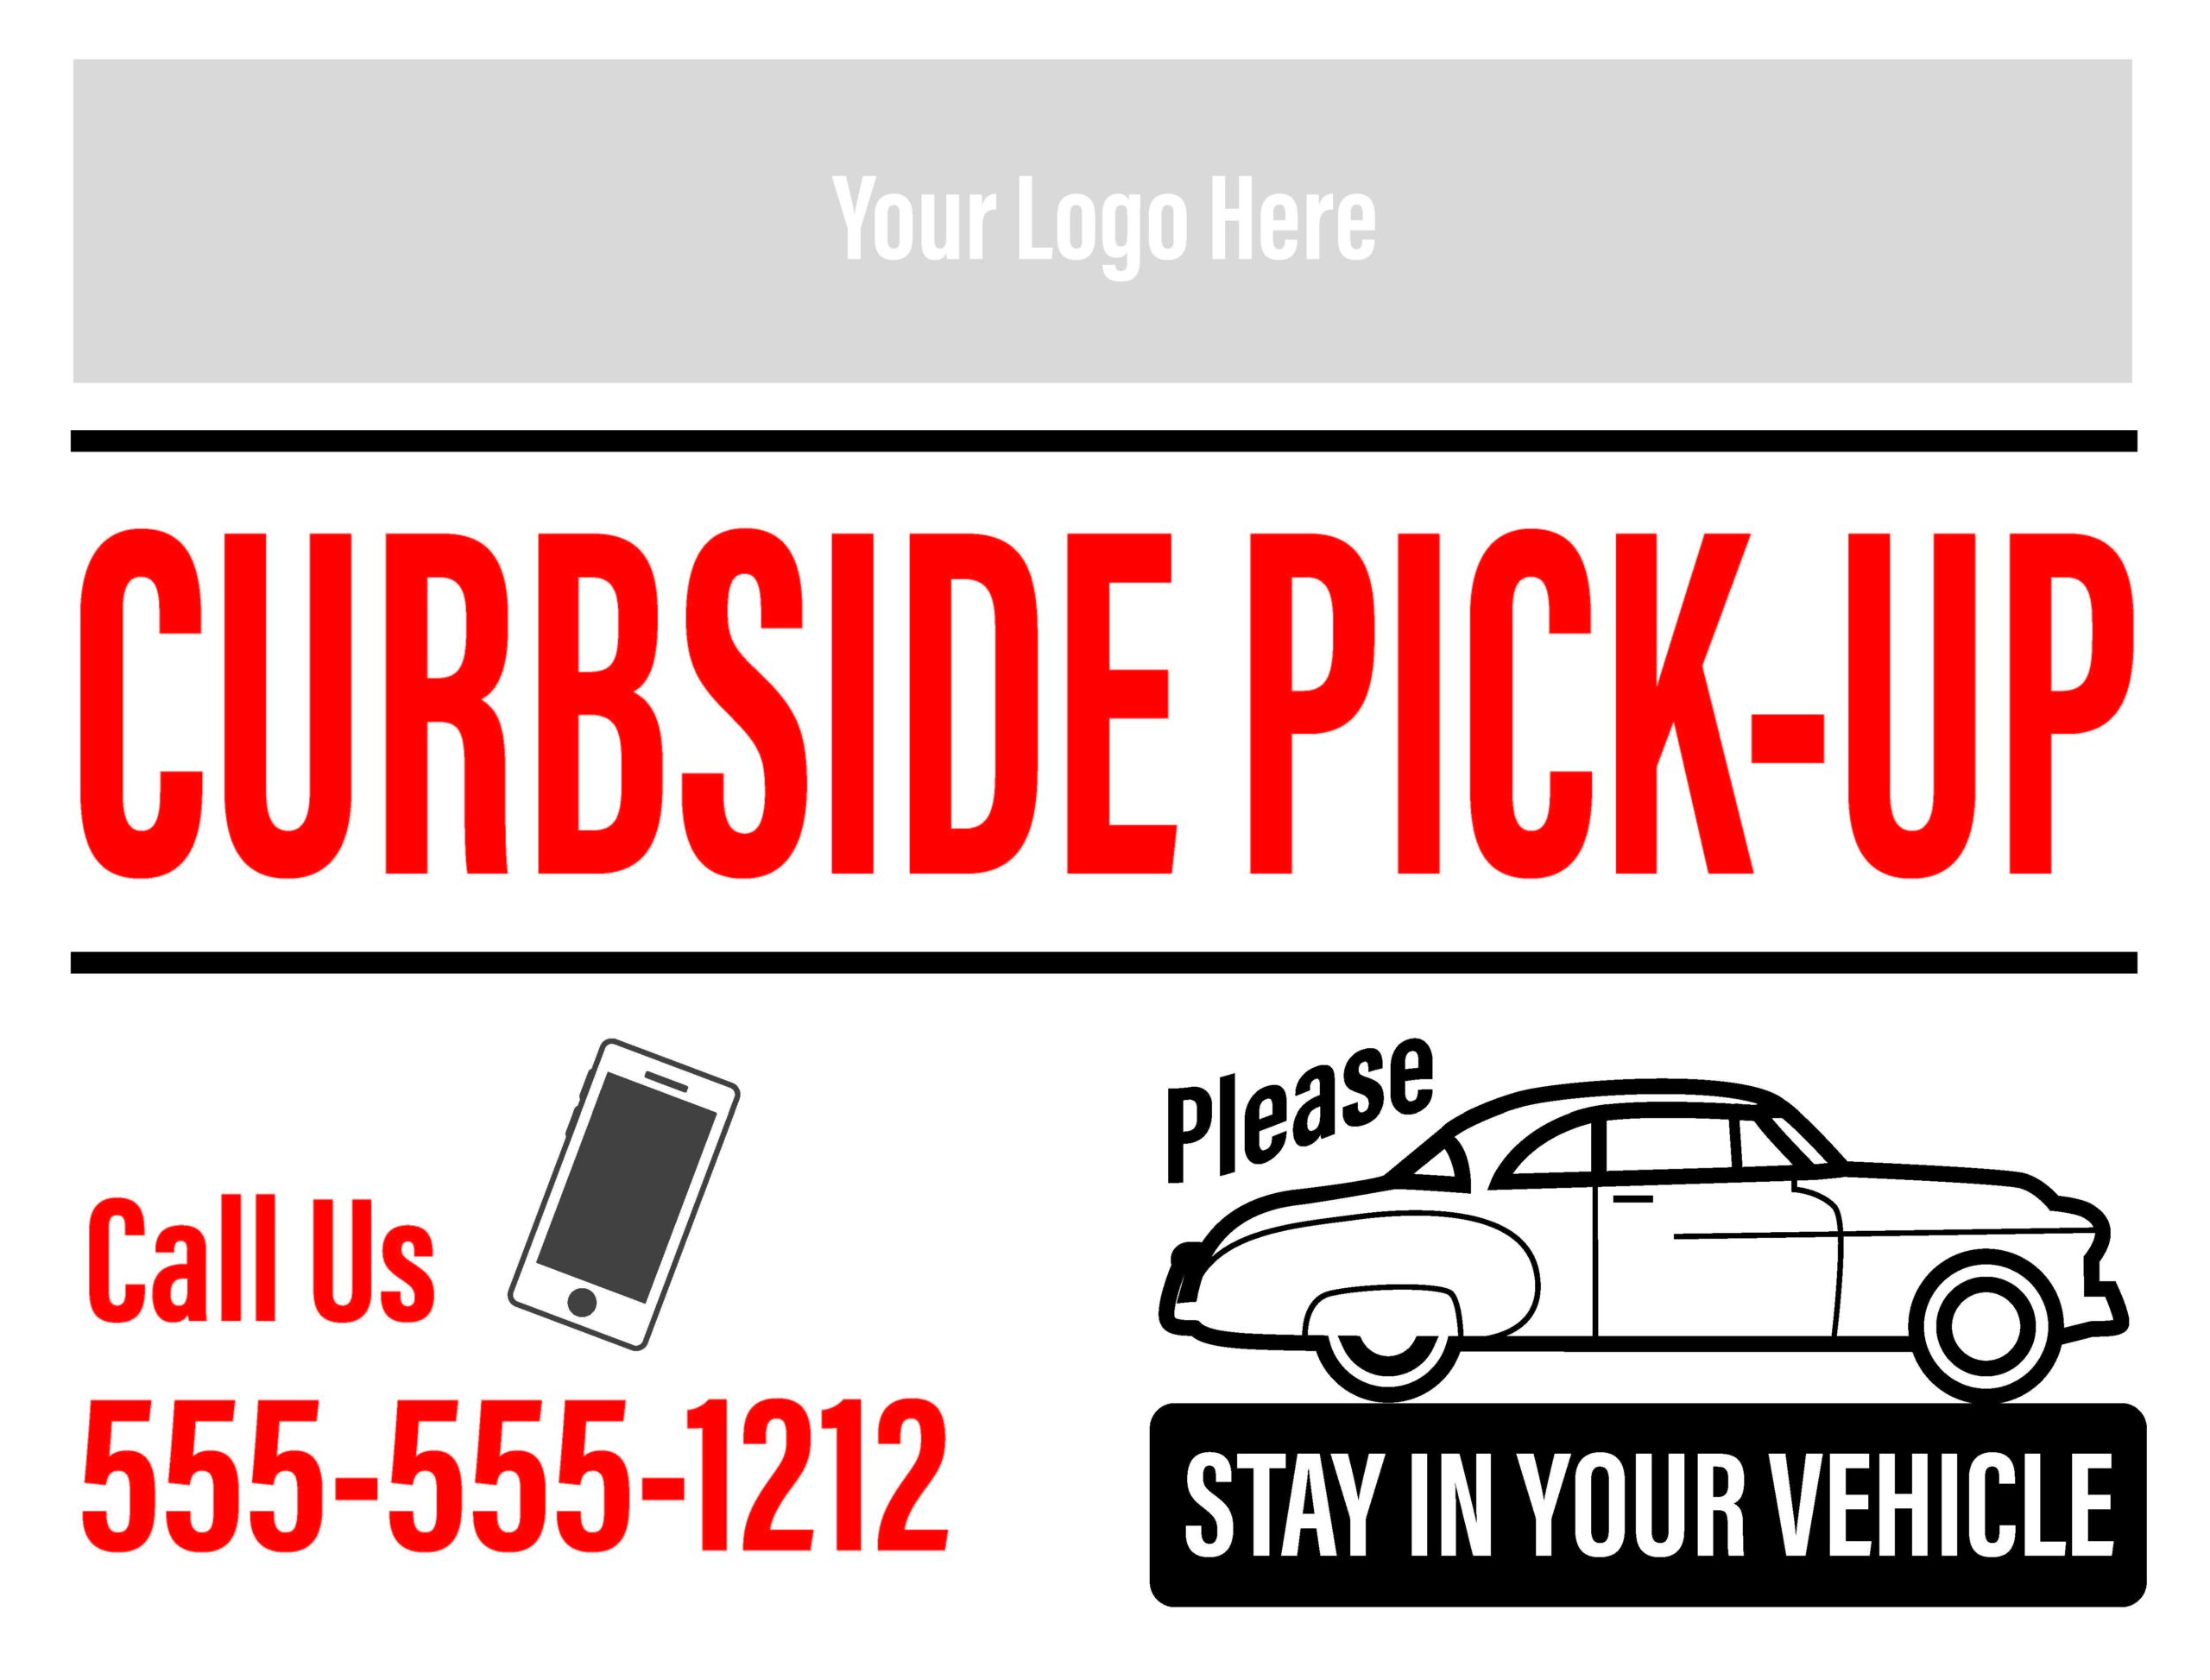 Curbside Pickup Signs 24”x 18”, printed on White Coroplast (outside) #4